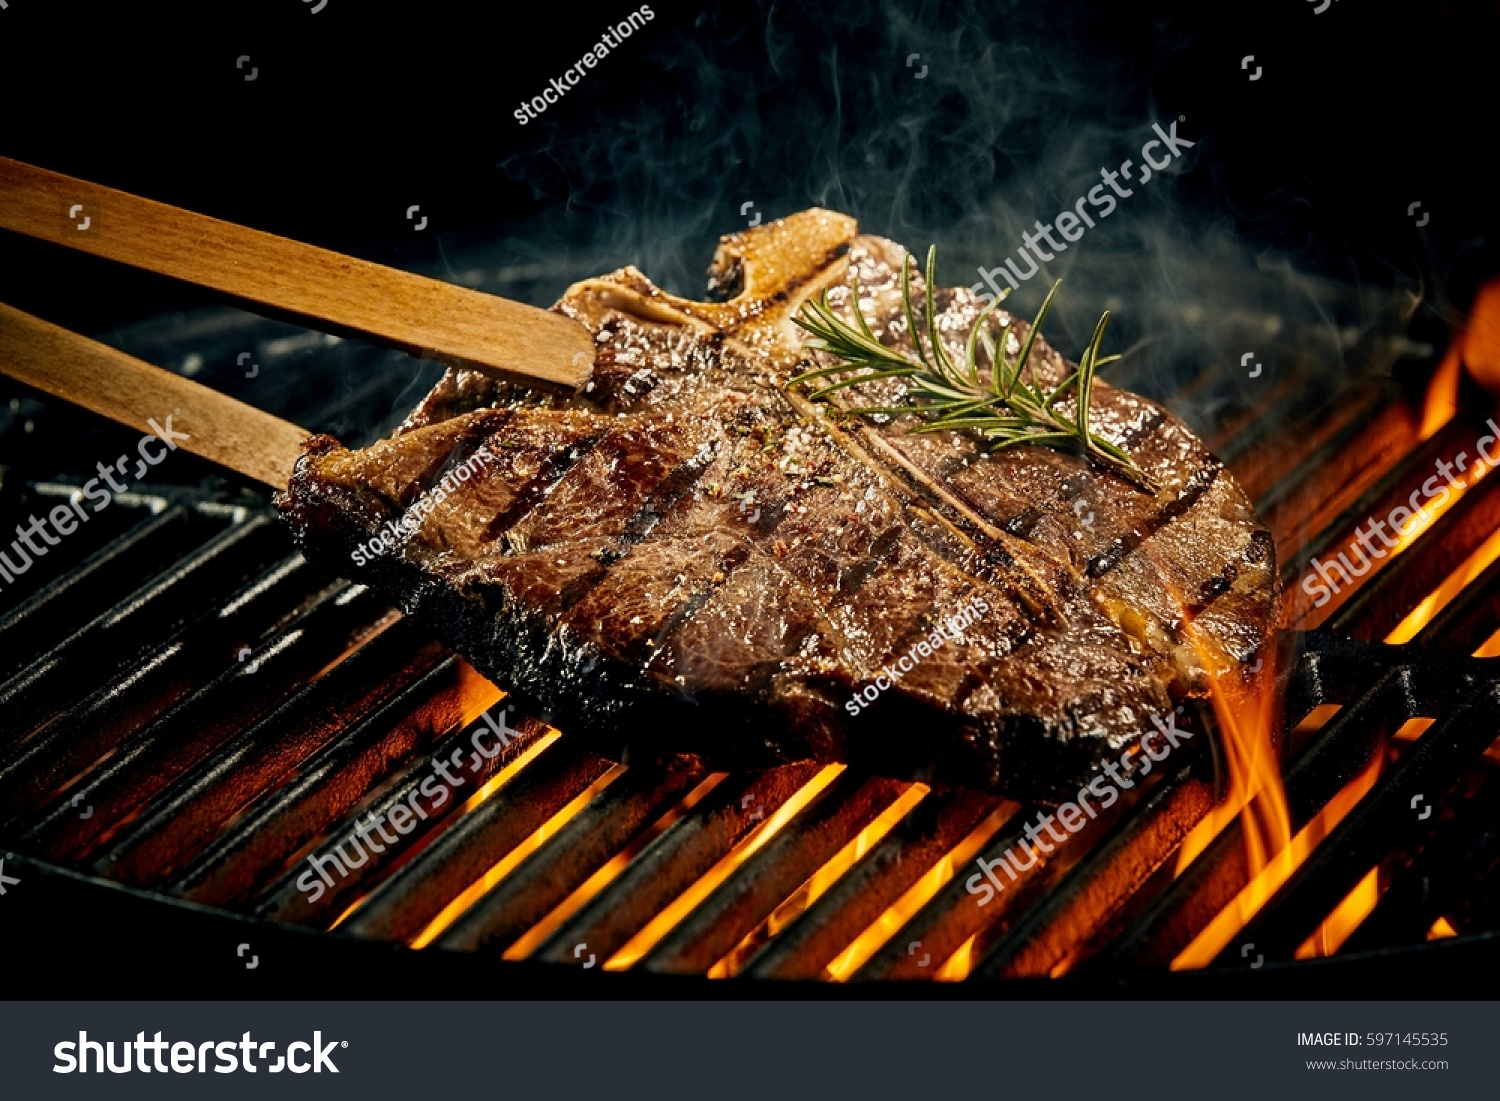 Grilling a tasty tender marinated t-bone steak seasoned with fresh rosemary on a barbecue fire with hot fiery coals in a close up view #597145535